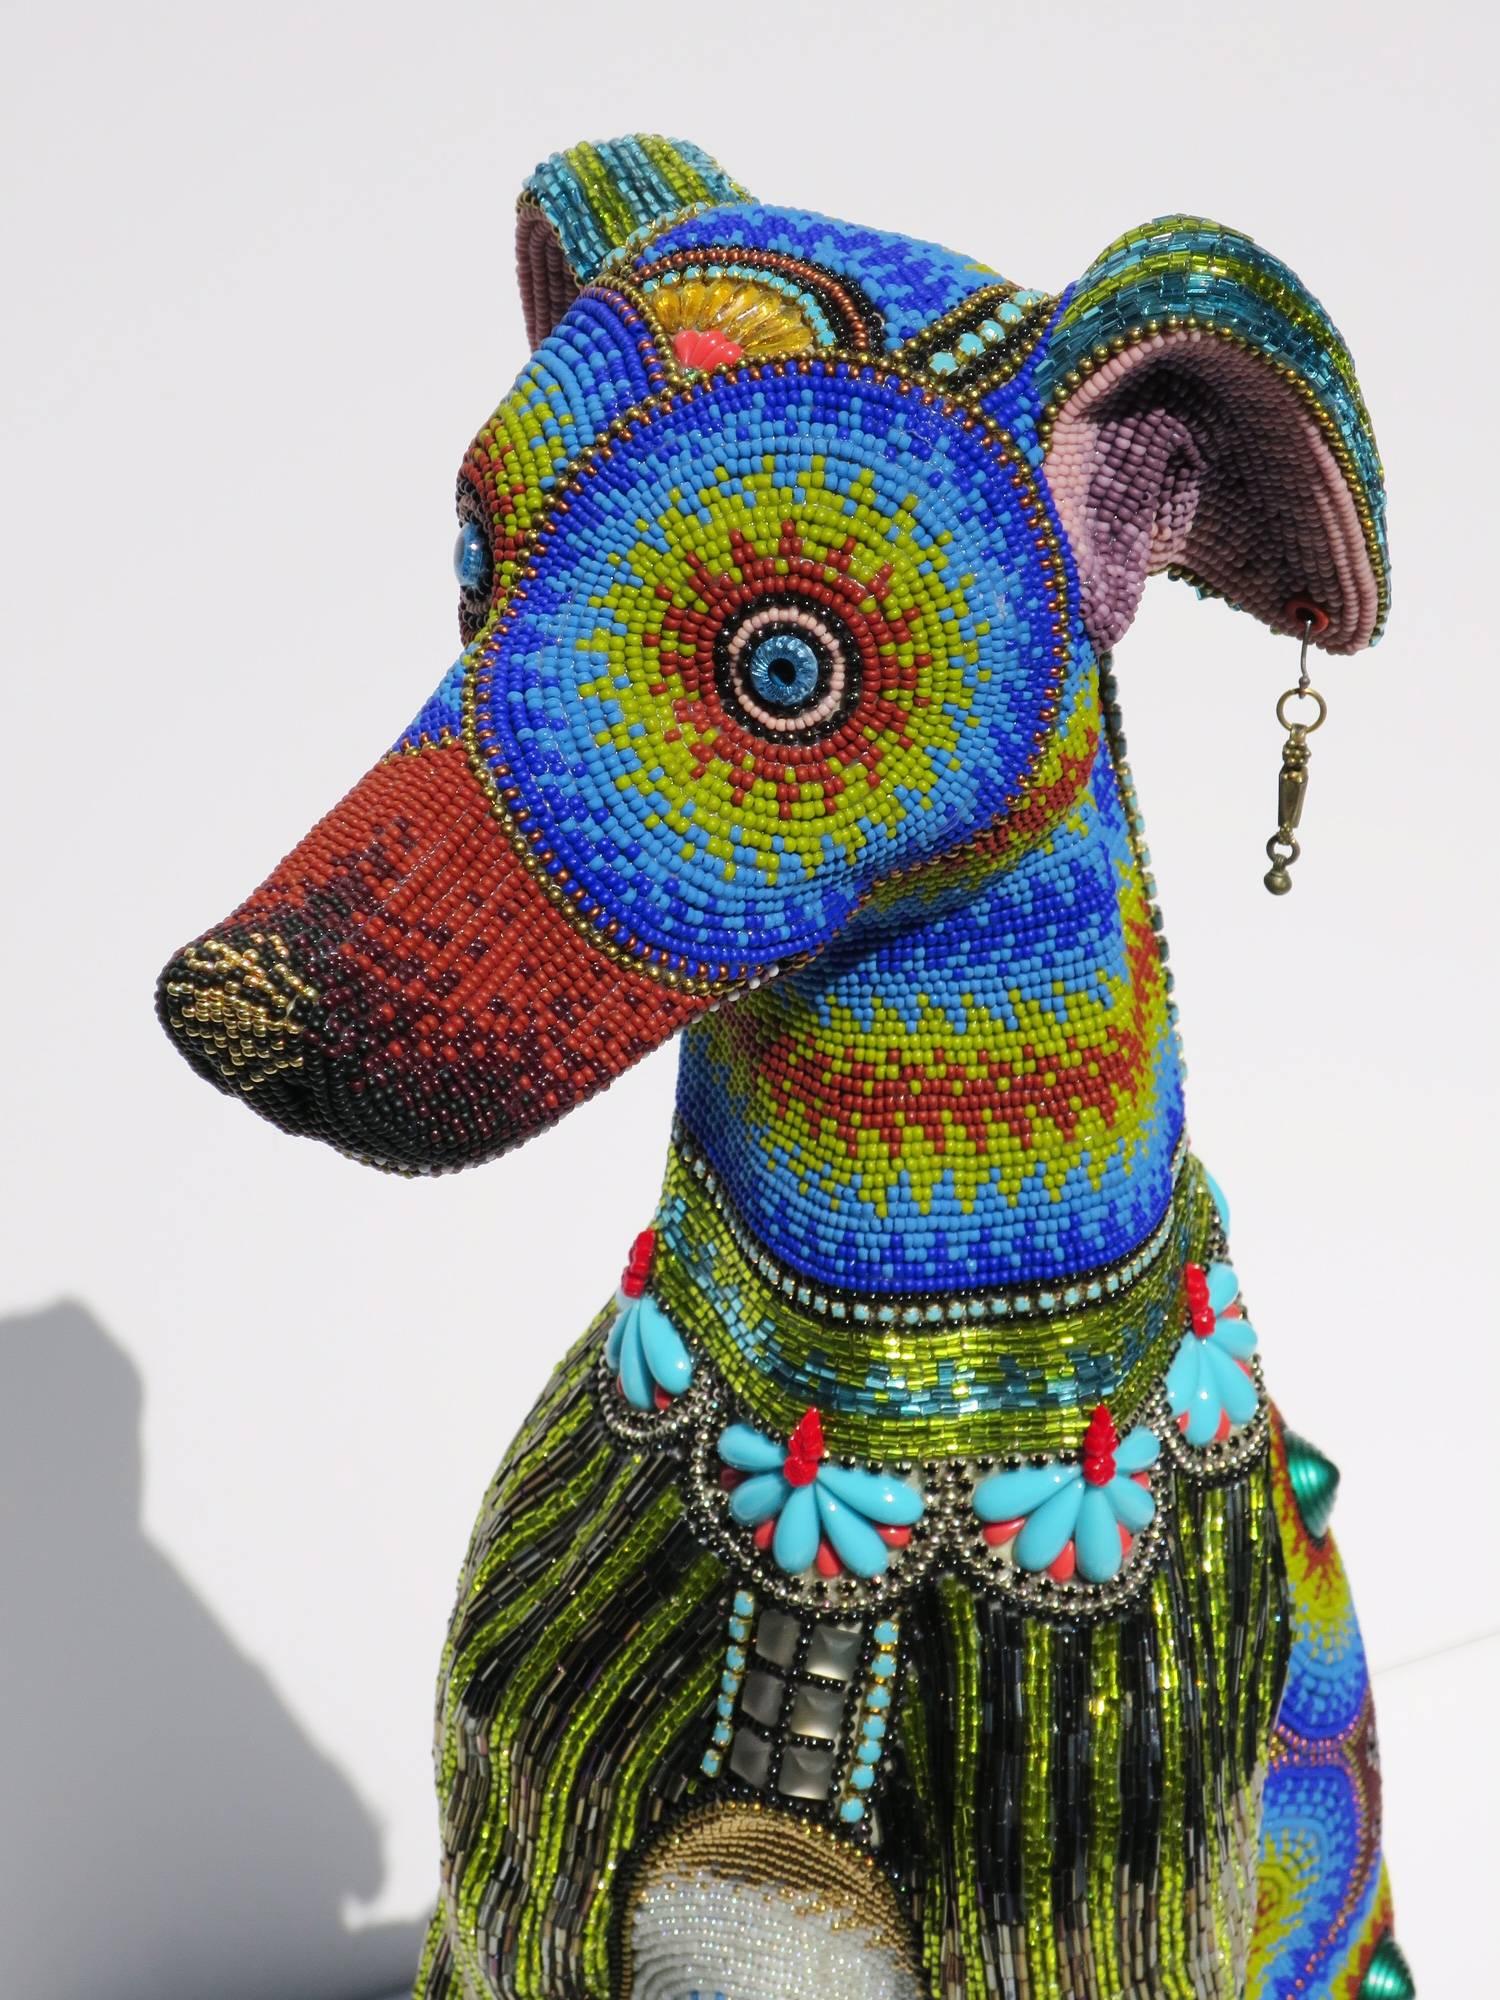 Jan Huling's craft combines obsessively applied beads with fun and whimsical forms, giving each piece a unique personality; with his playful expression and cheerful demeanor, Dicky Boy is no exception. 

Created 2016
20.5